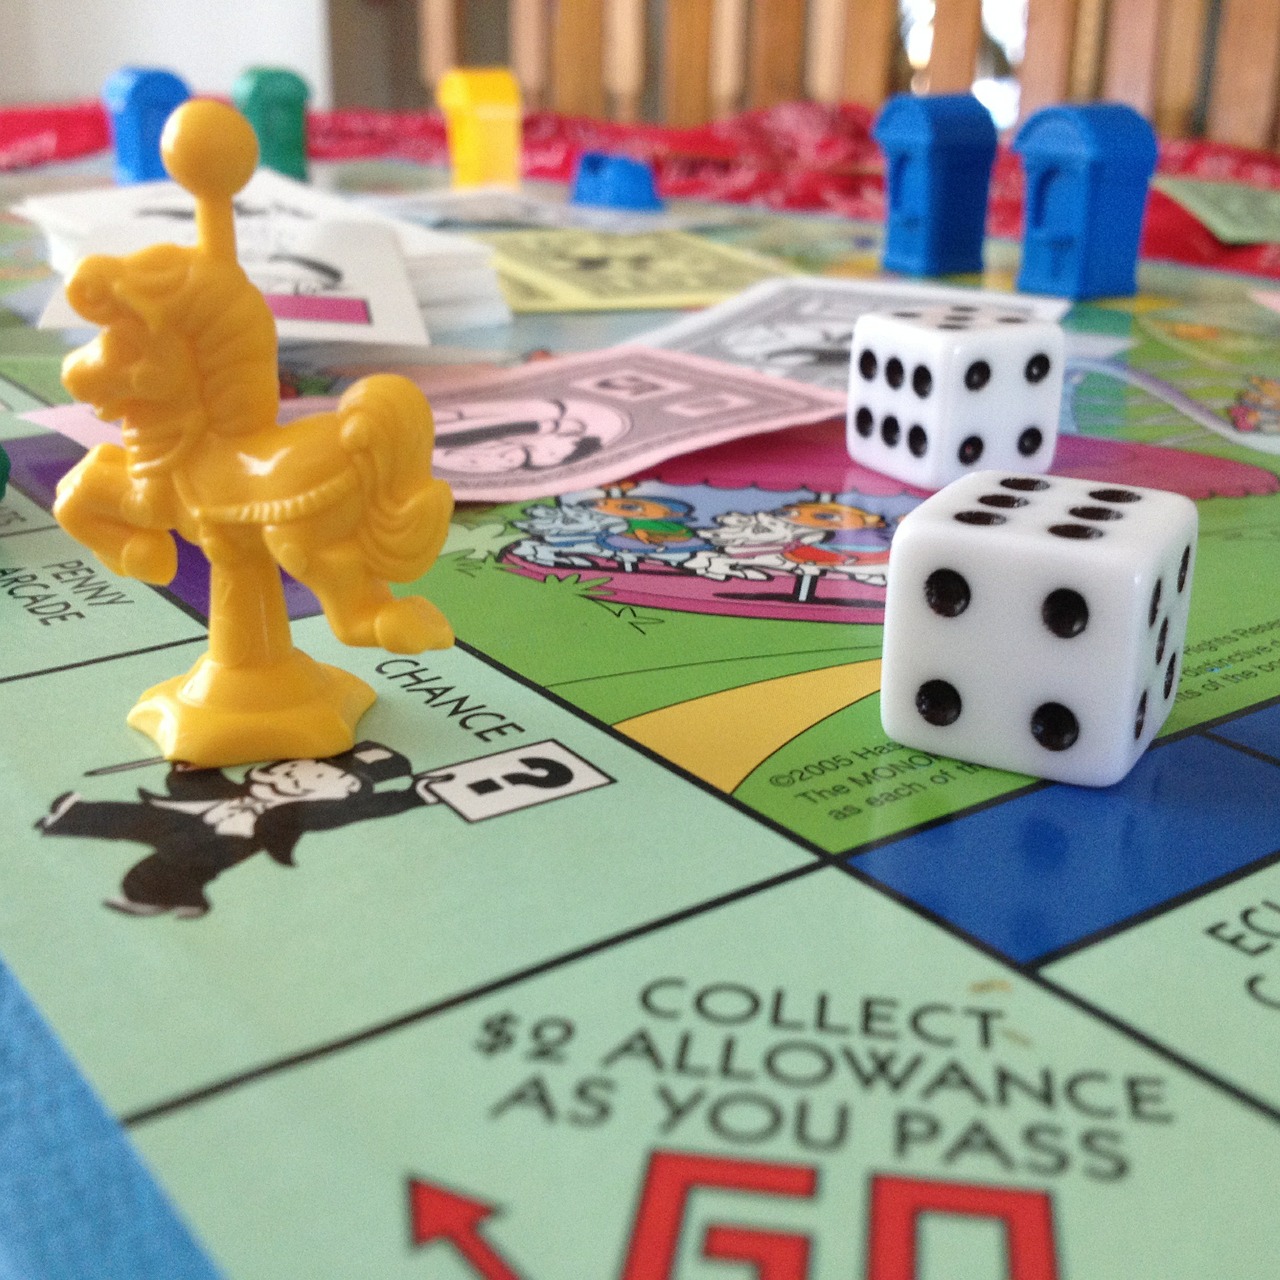 monopoly junior monopoly board game free photo